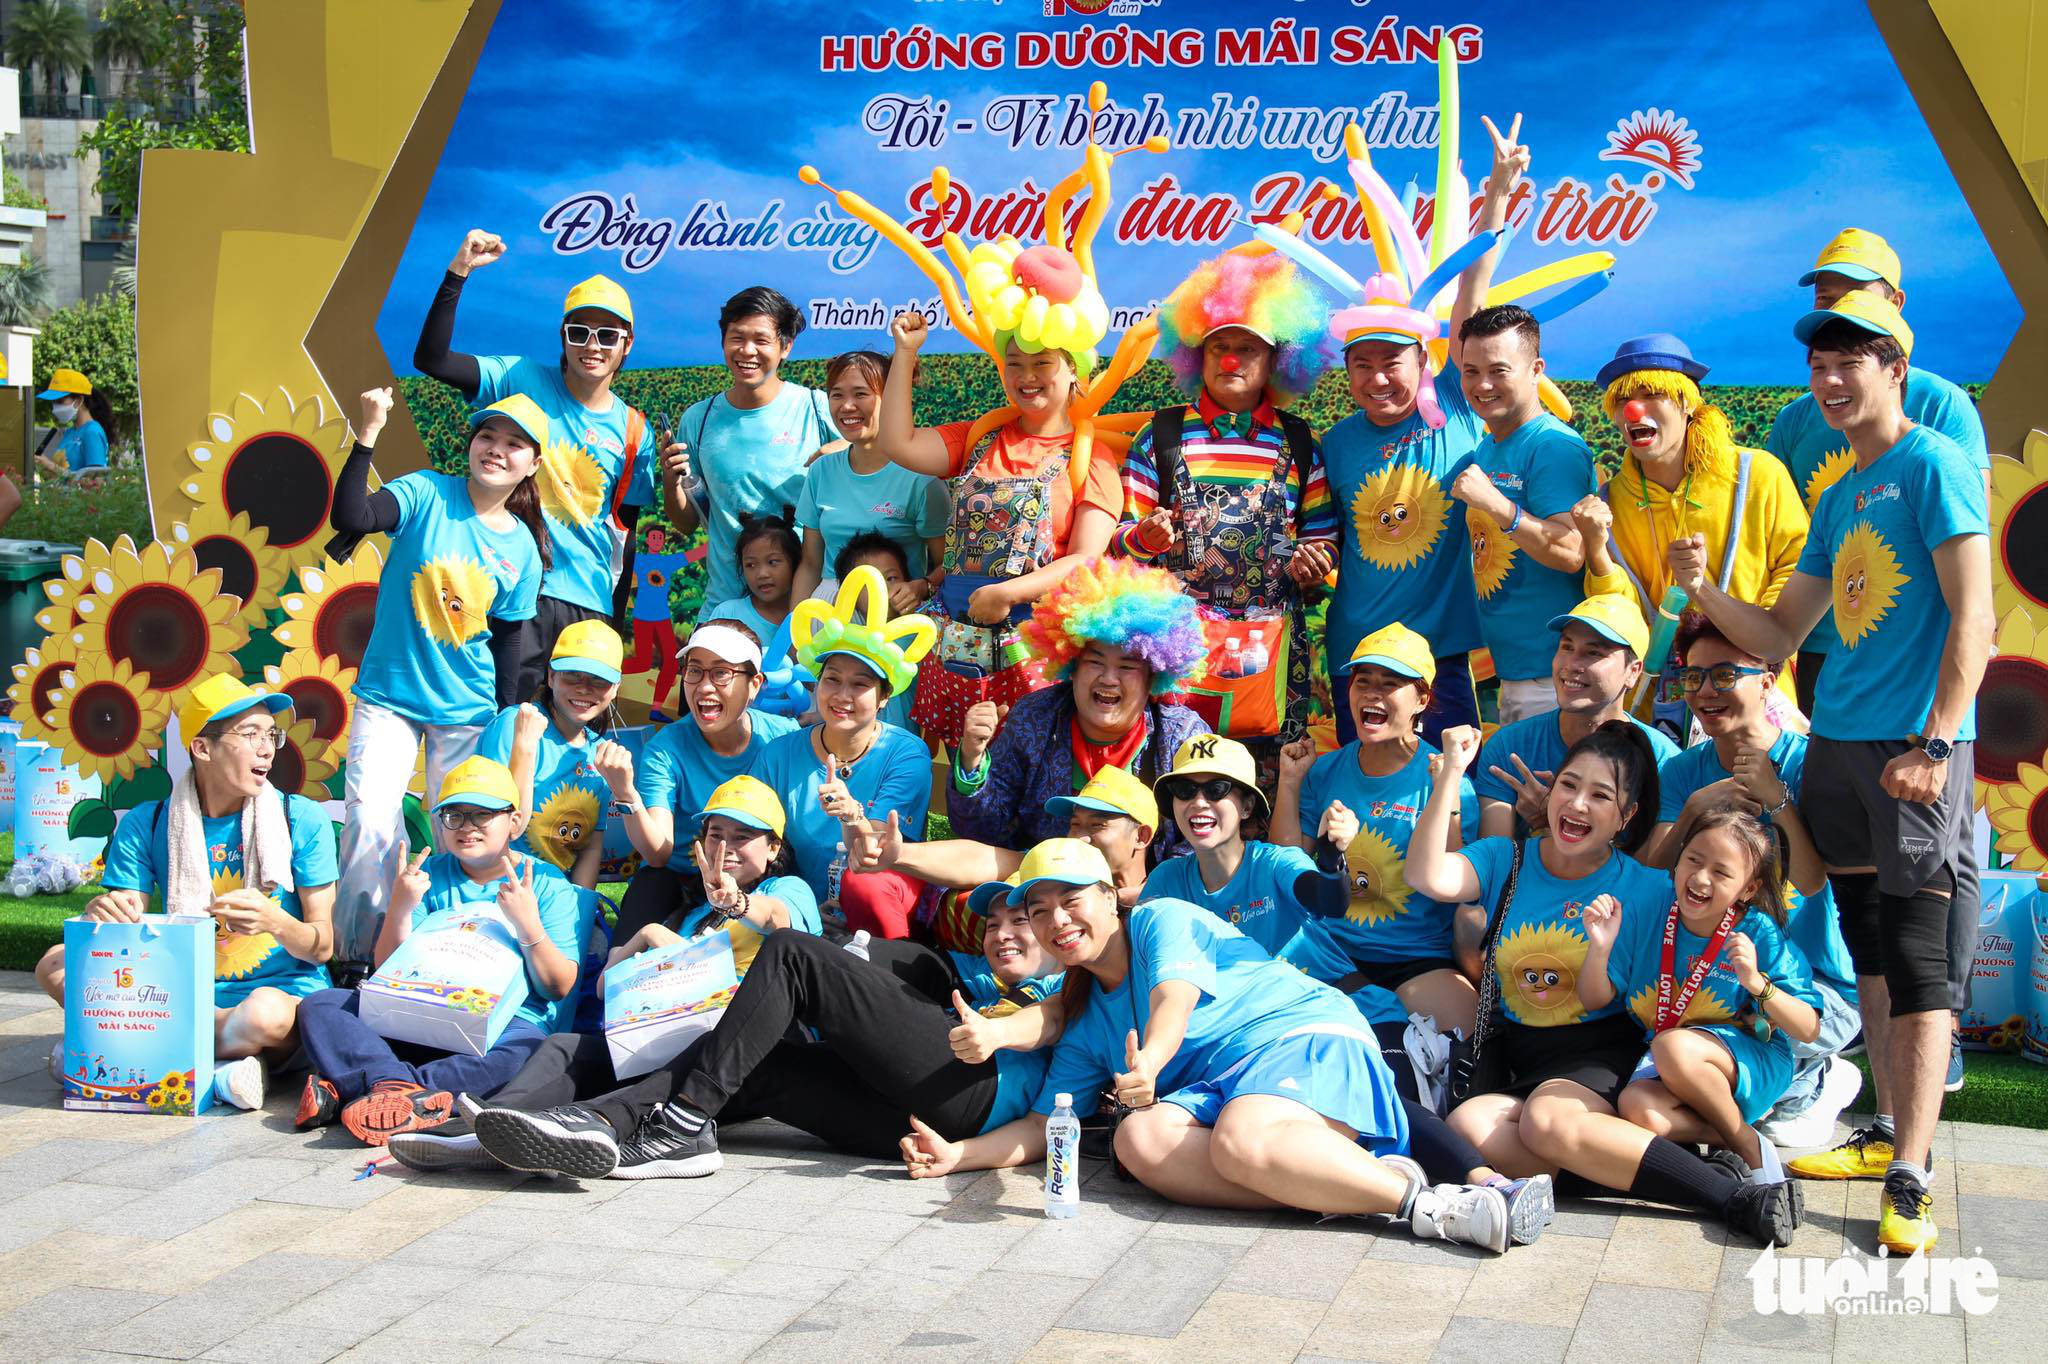 Participants pose for a photo at the marathon in Binh Thanh District, Ho Chi Minh City, May 22, 2022. Photo: Minh Duy / Tuoi Tre